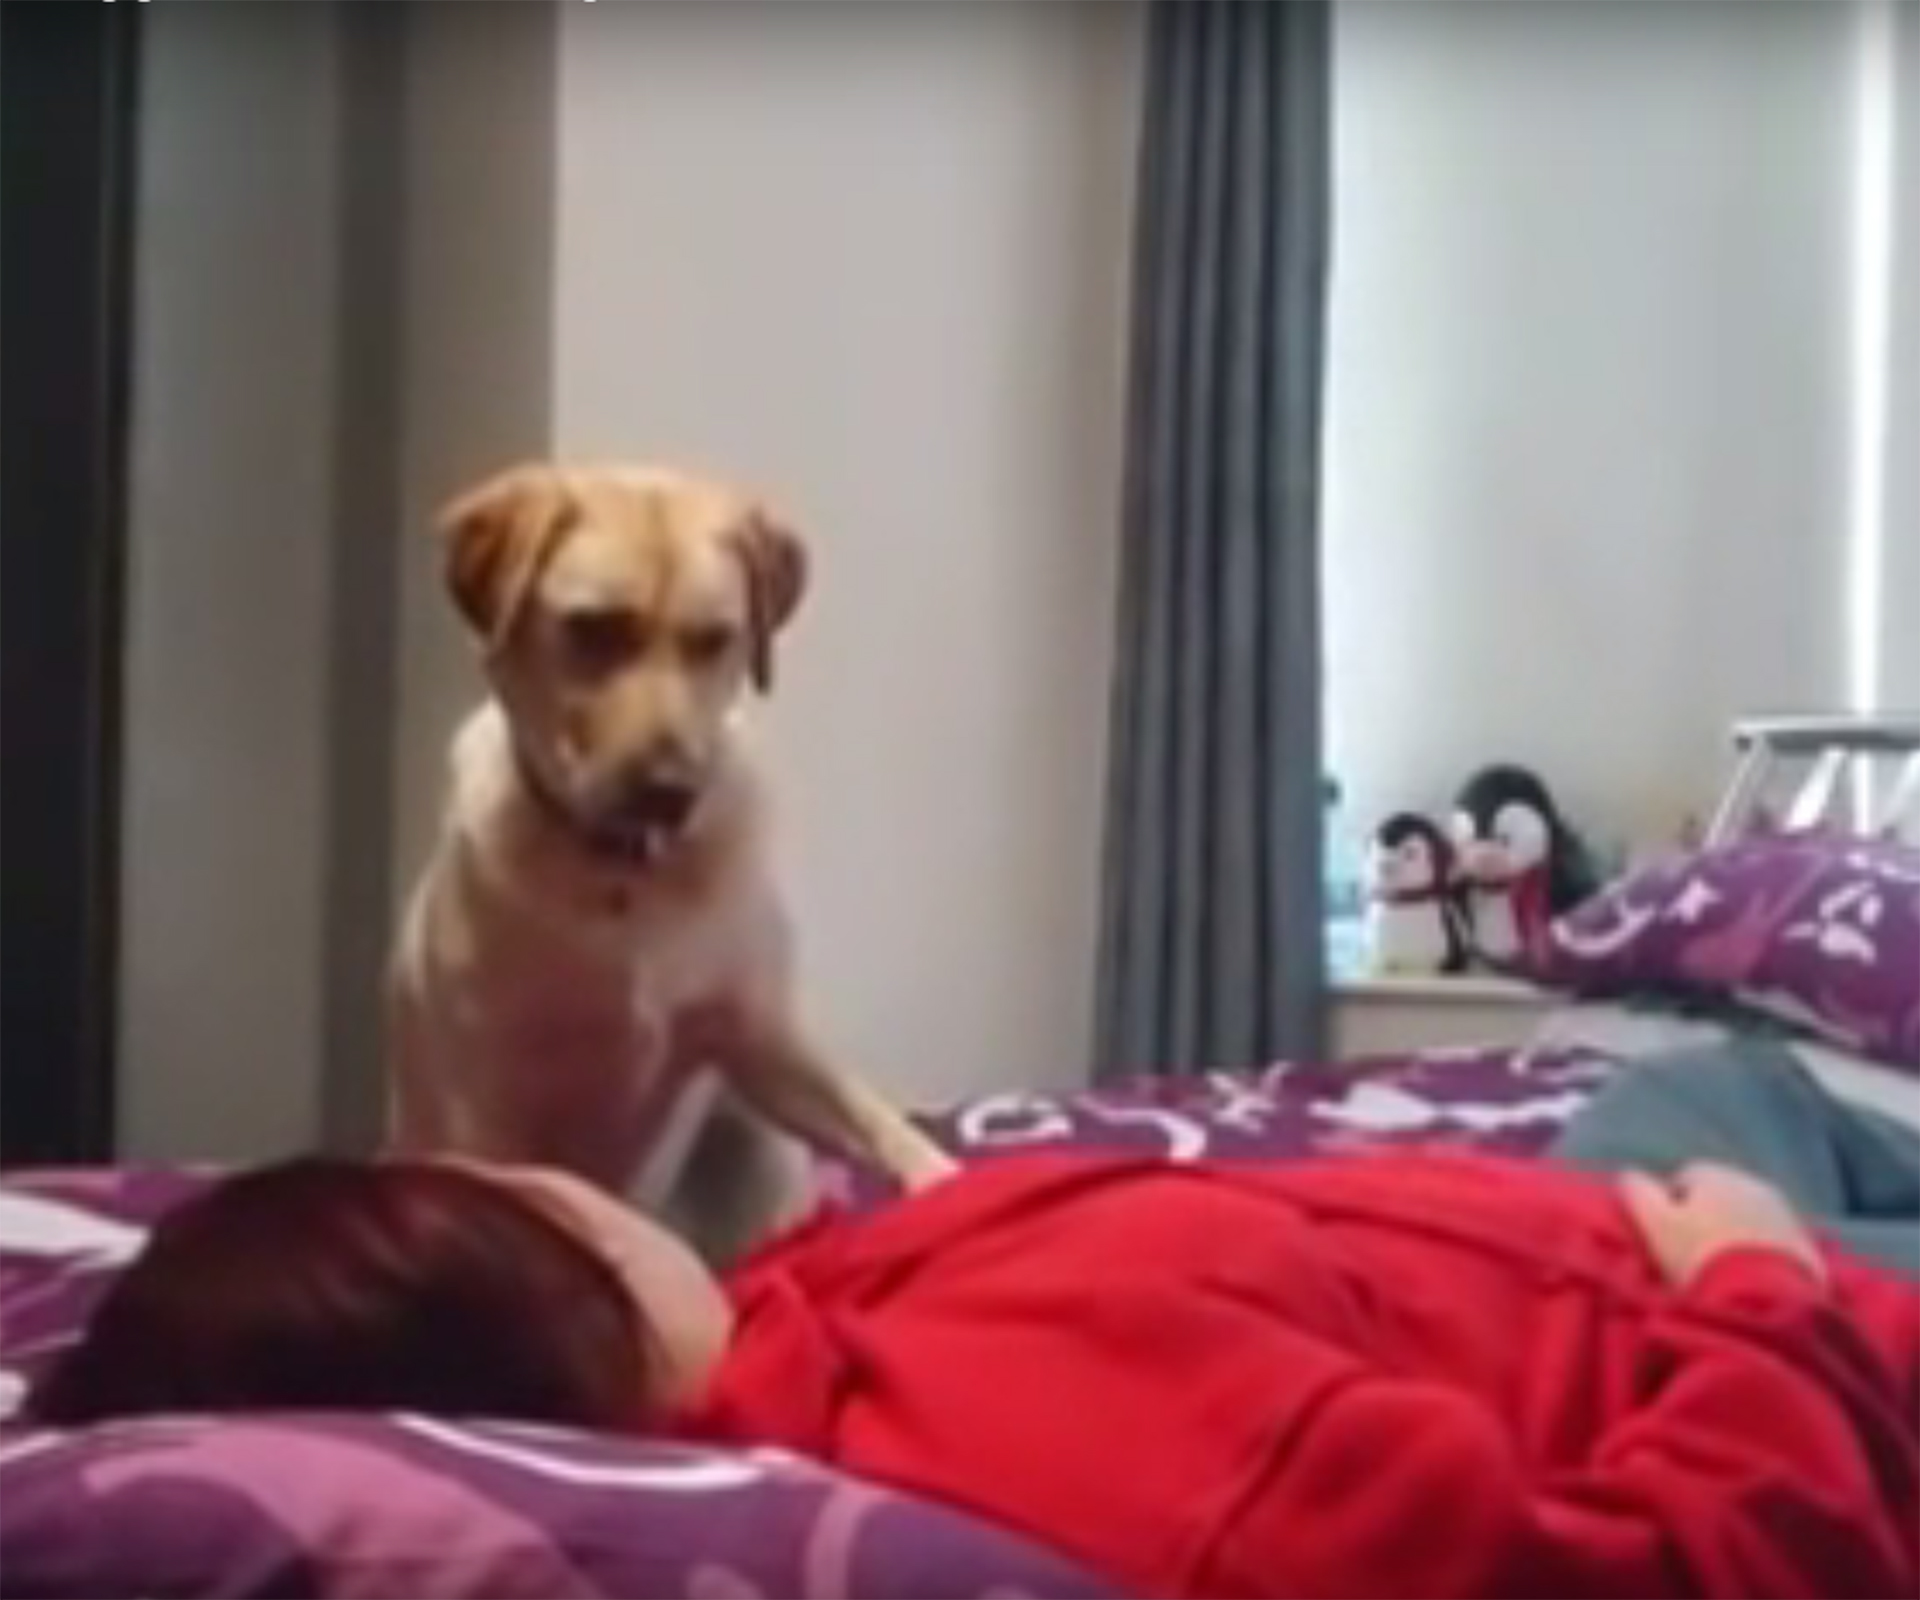 Watch this incredible dog warn her owner she’s about to have a seizure